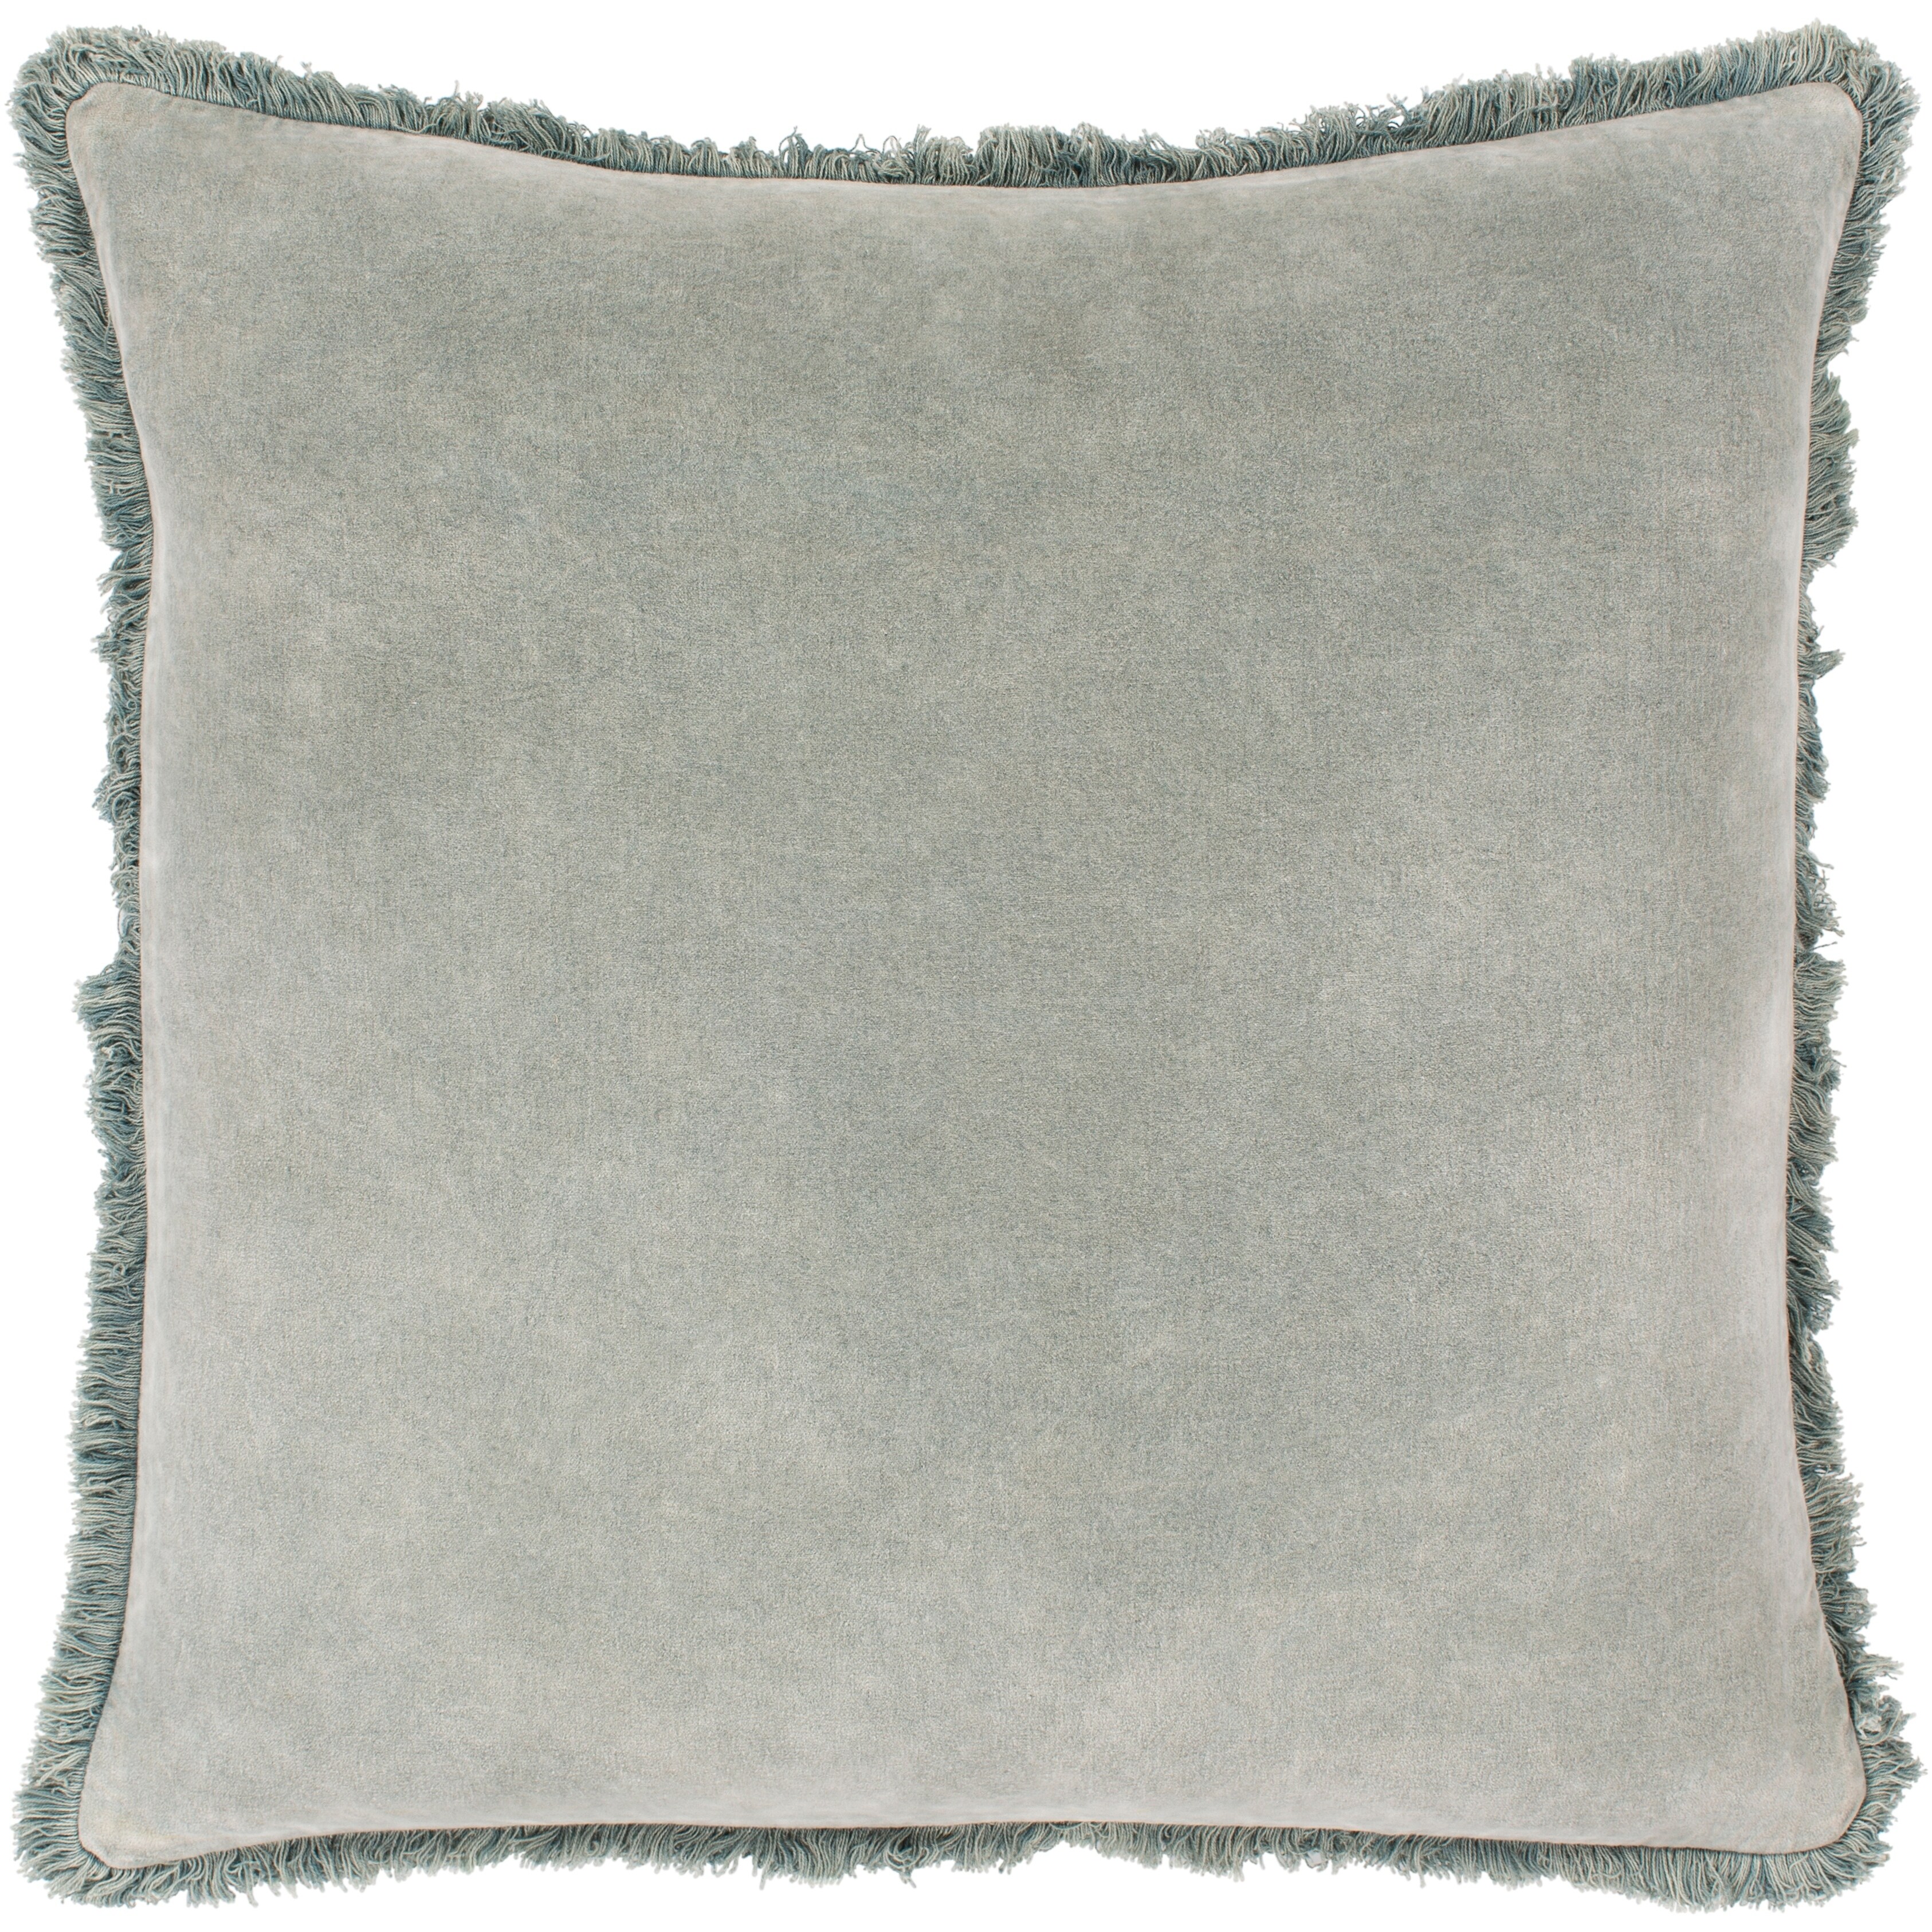 Better Homes & Gardens Decorative Throw Pillow, Cotton Fringe, Square,  Grey, 20''x20'', 2 Pack